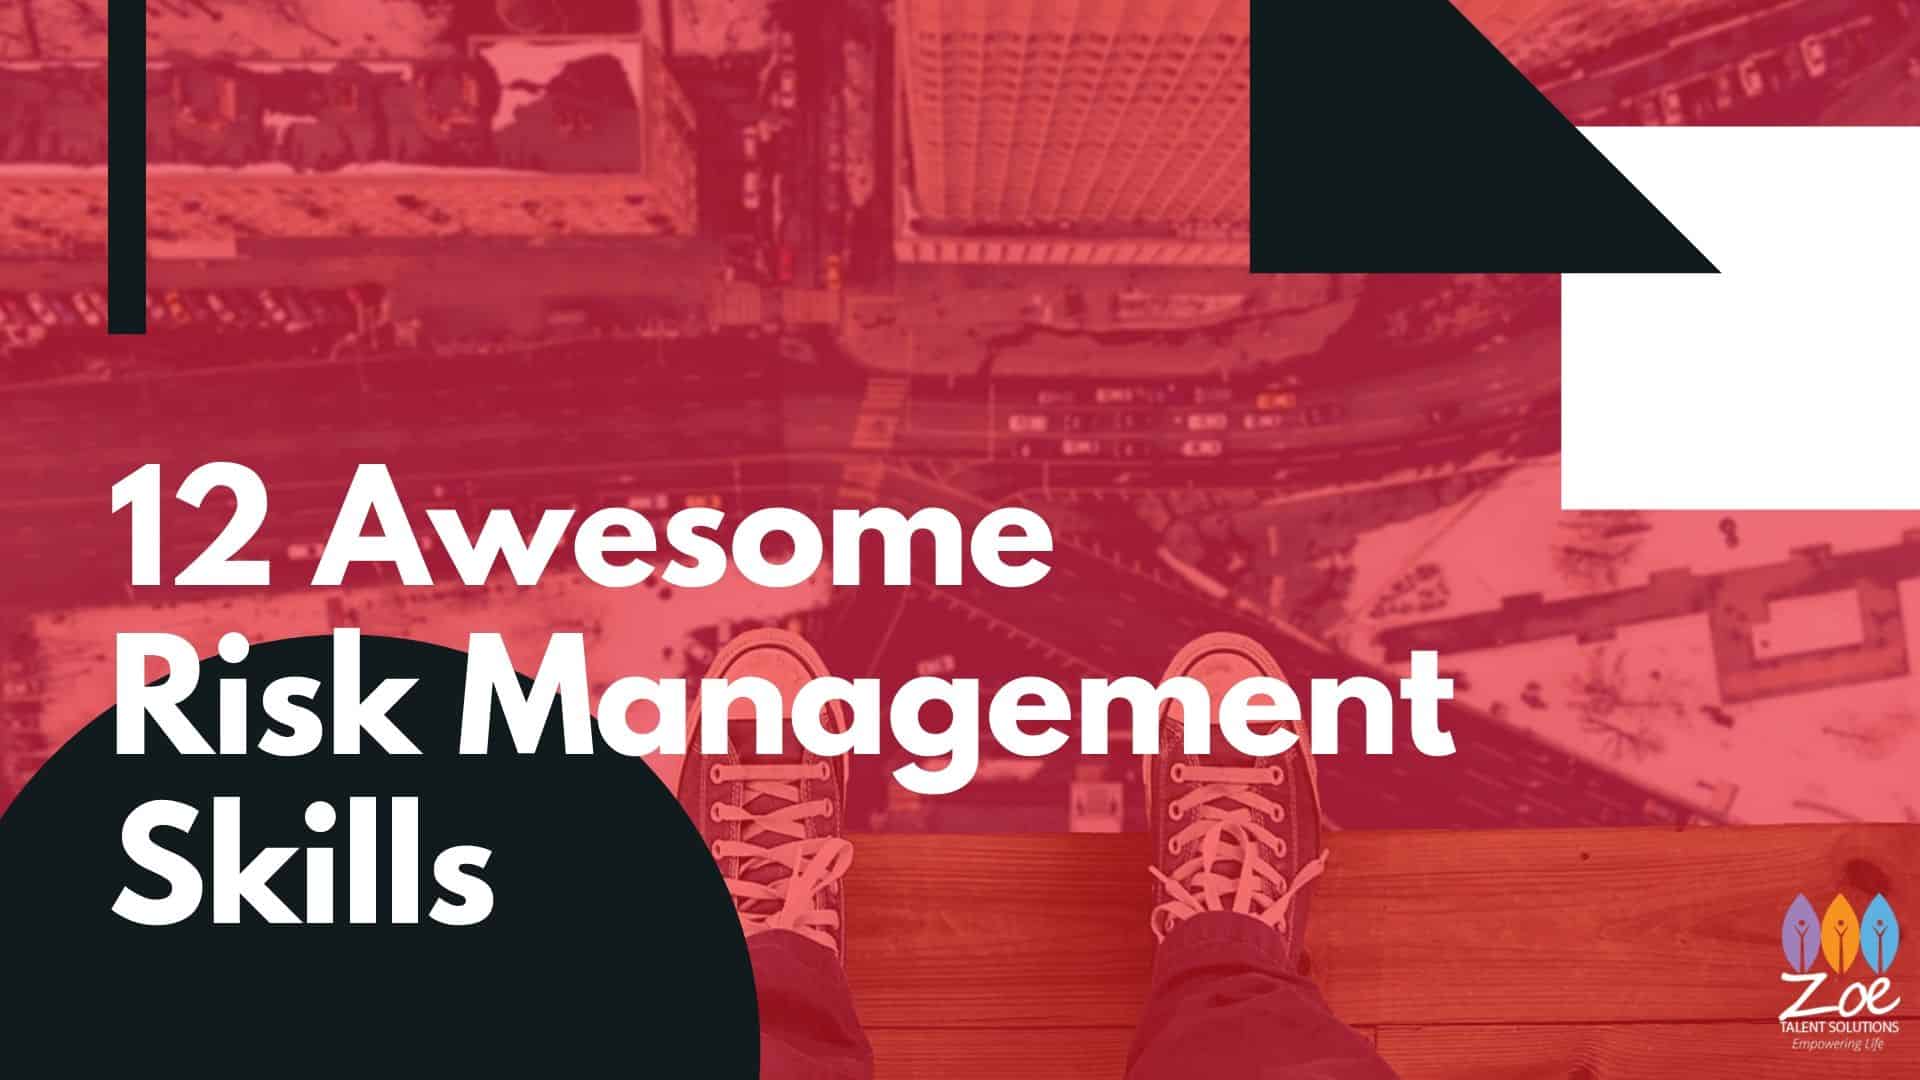 12 Awesome Risk Management Skills - Zoe Talent Solutions